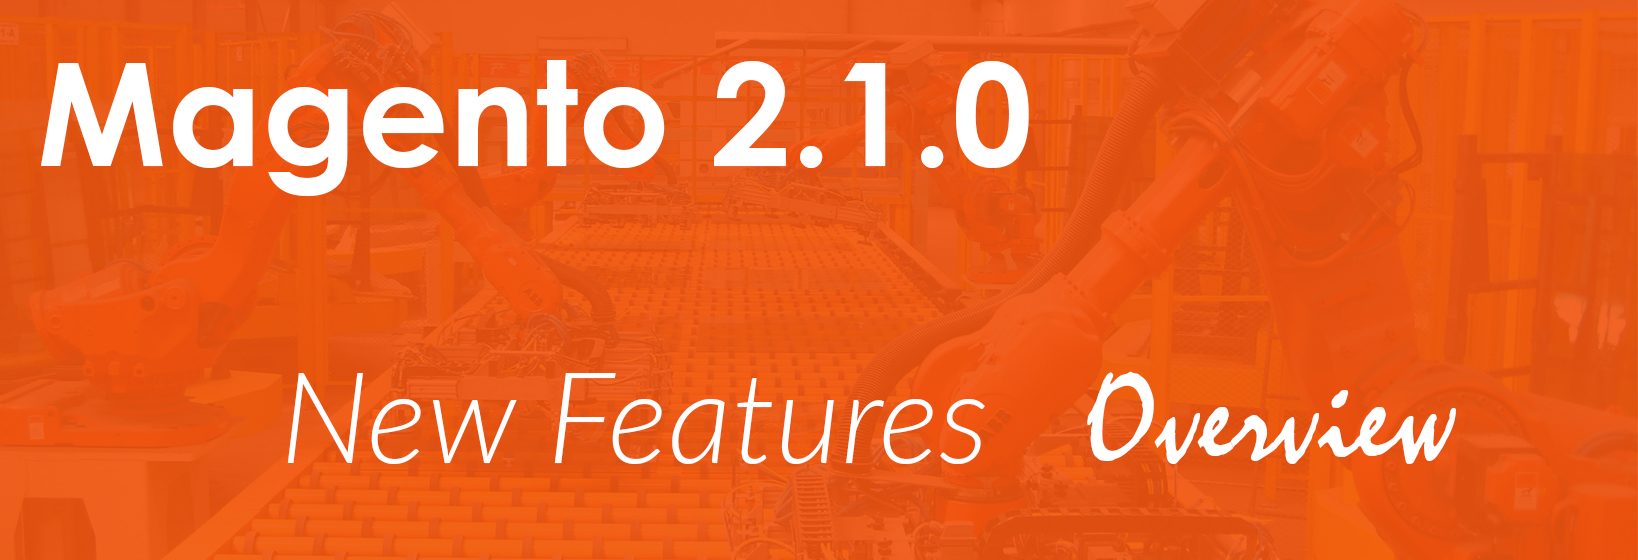 Magento 2.1: New Release Cool Opportunities